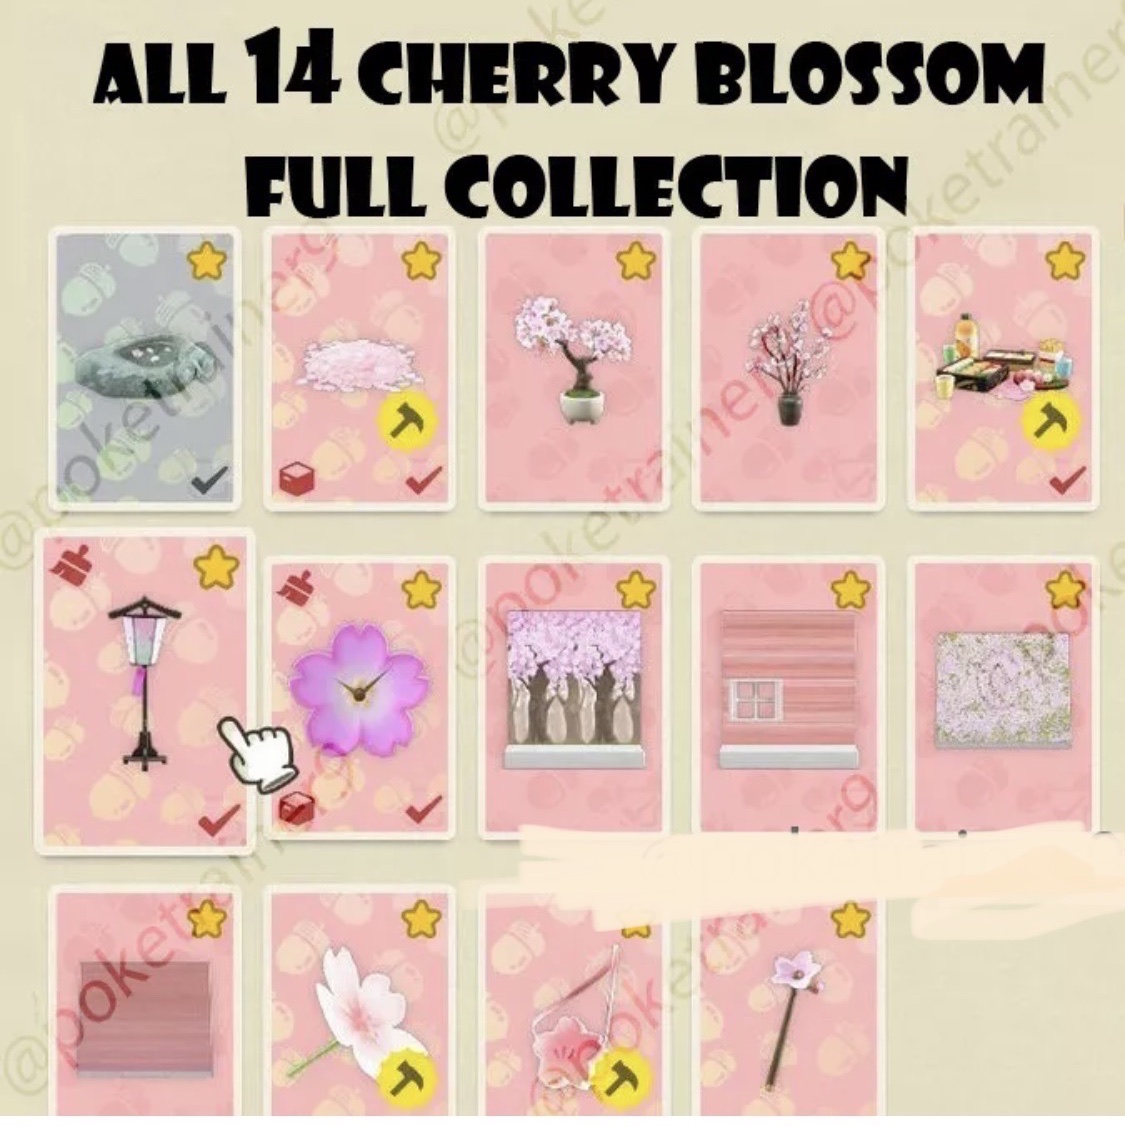 Cherry-Blossom Pochette Recipe and Required Materials  ACNH - Animal  Crossing: New Horizons (Switch)｜Game8